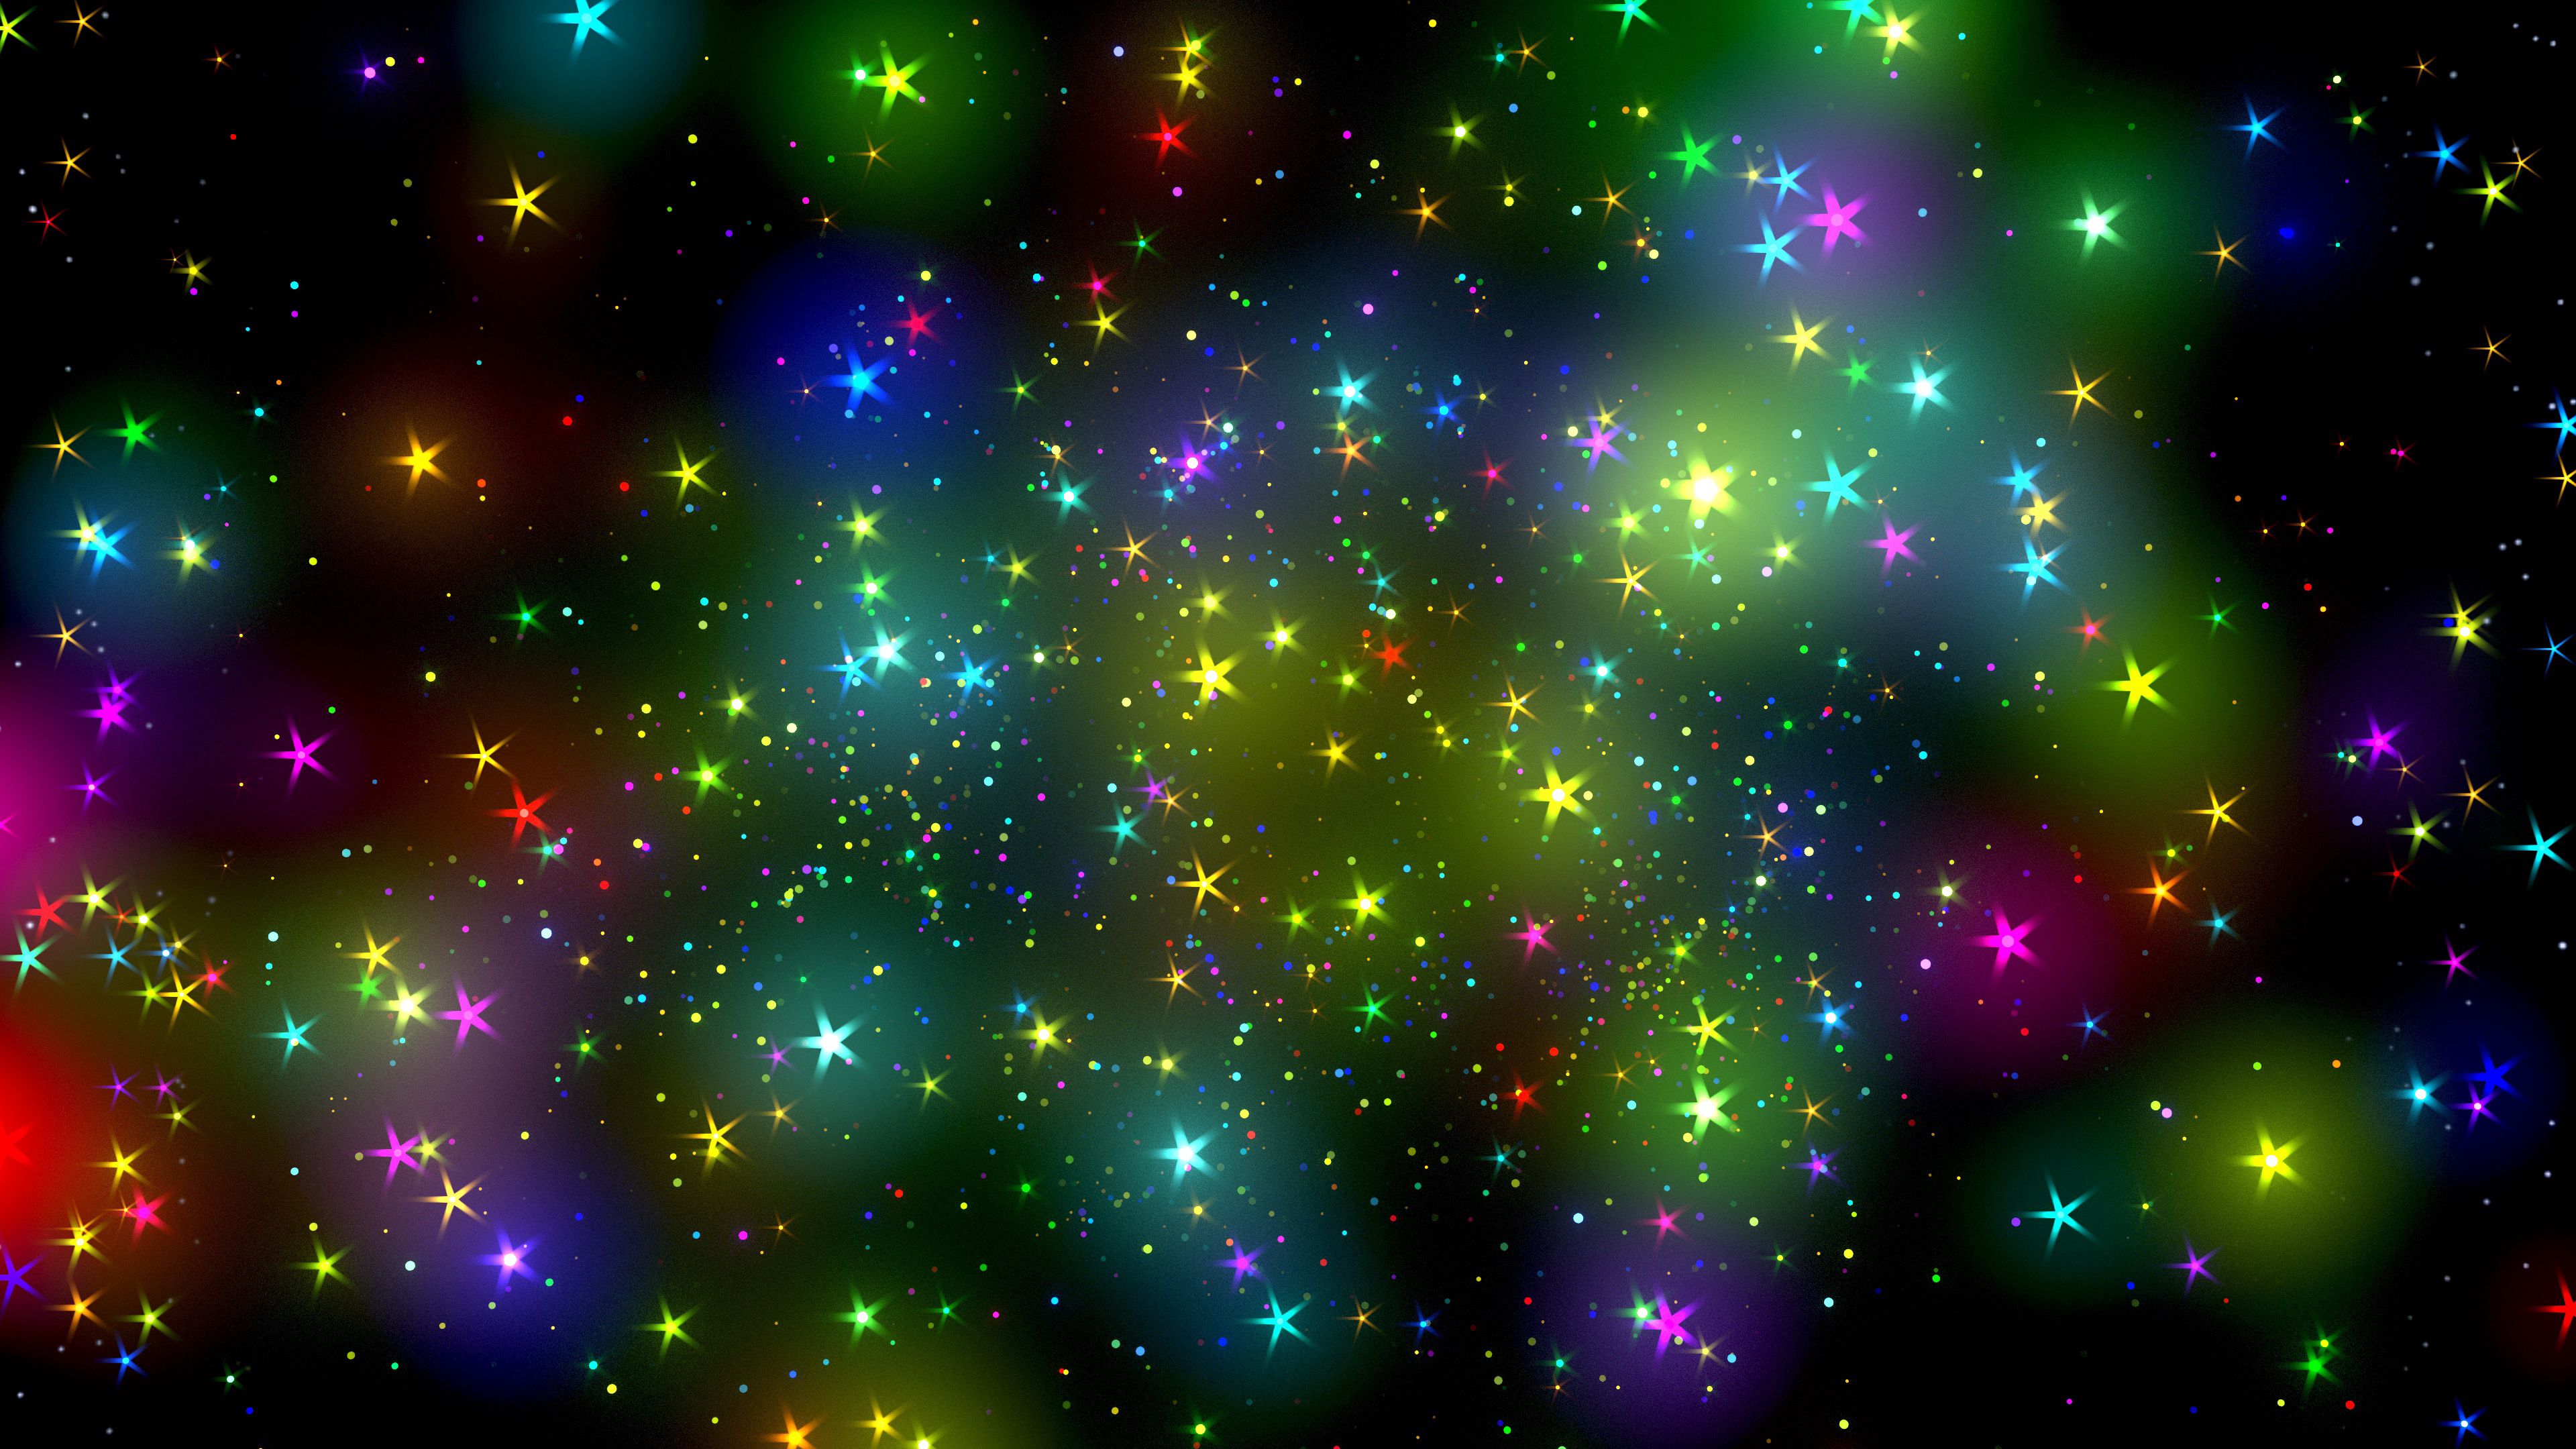 brilliance, multicolored, motley, shine, abstract, stars, shining wallpaper for mobile